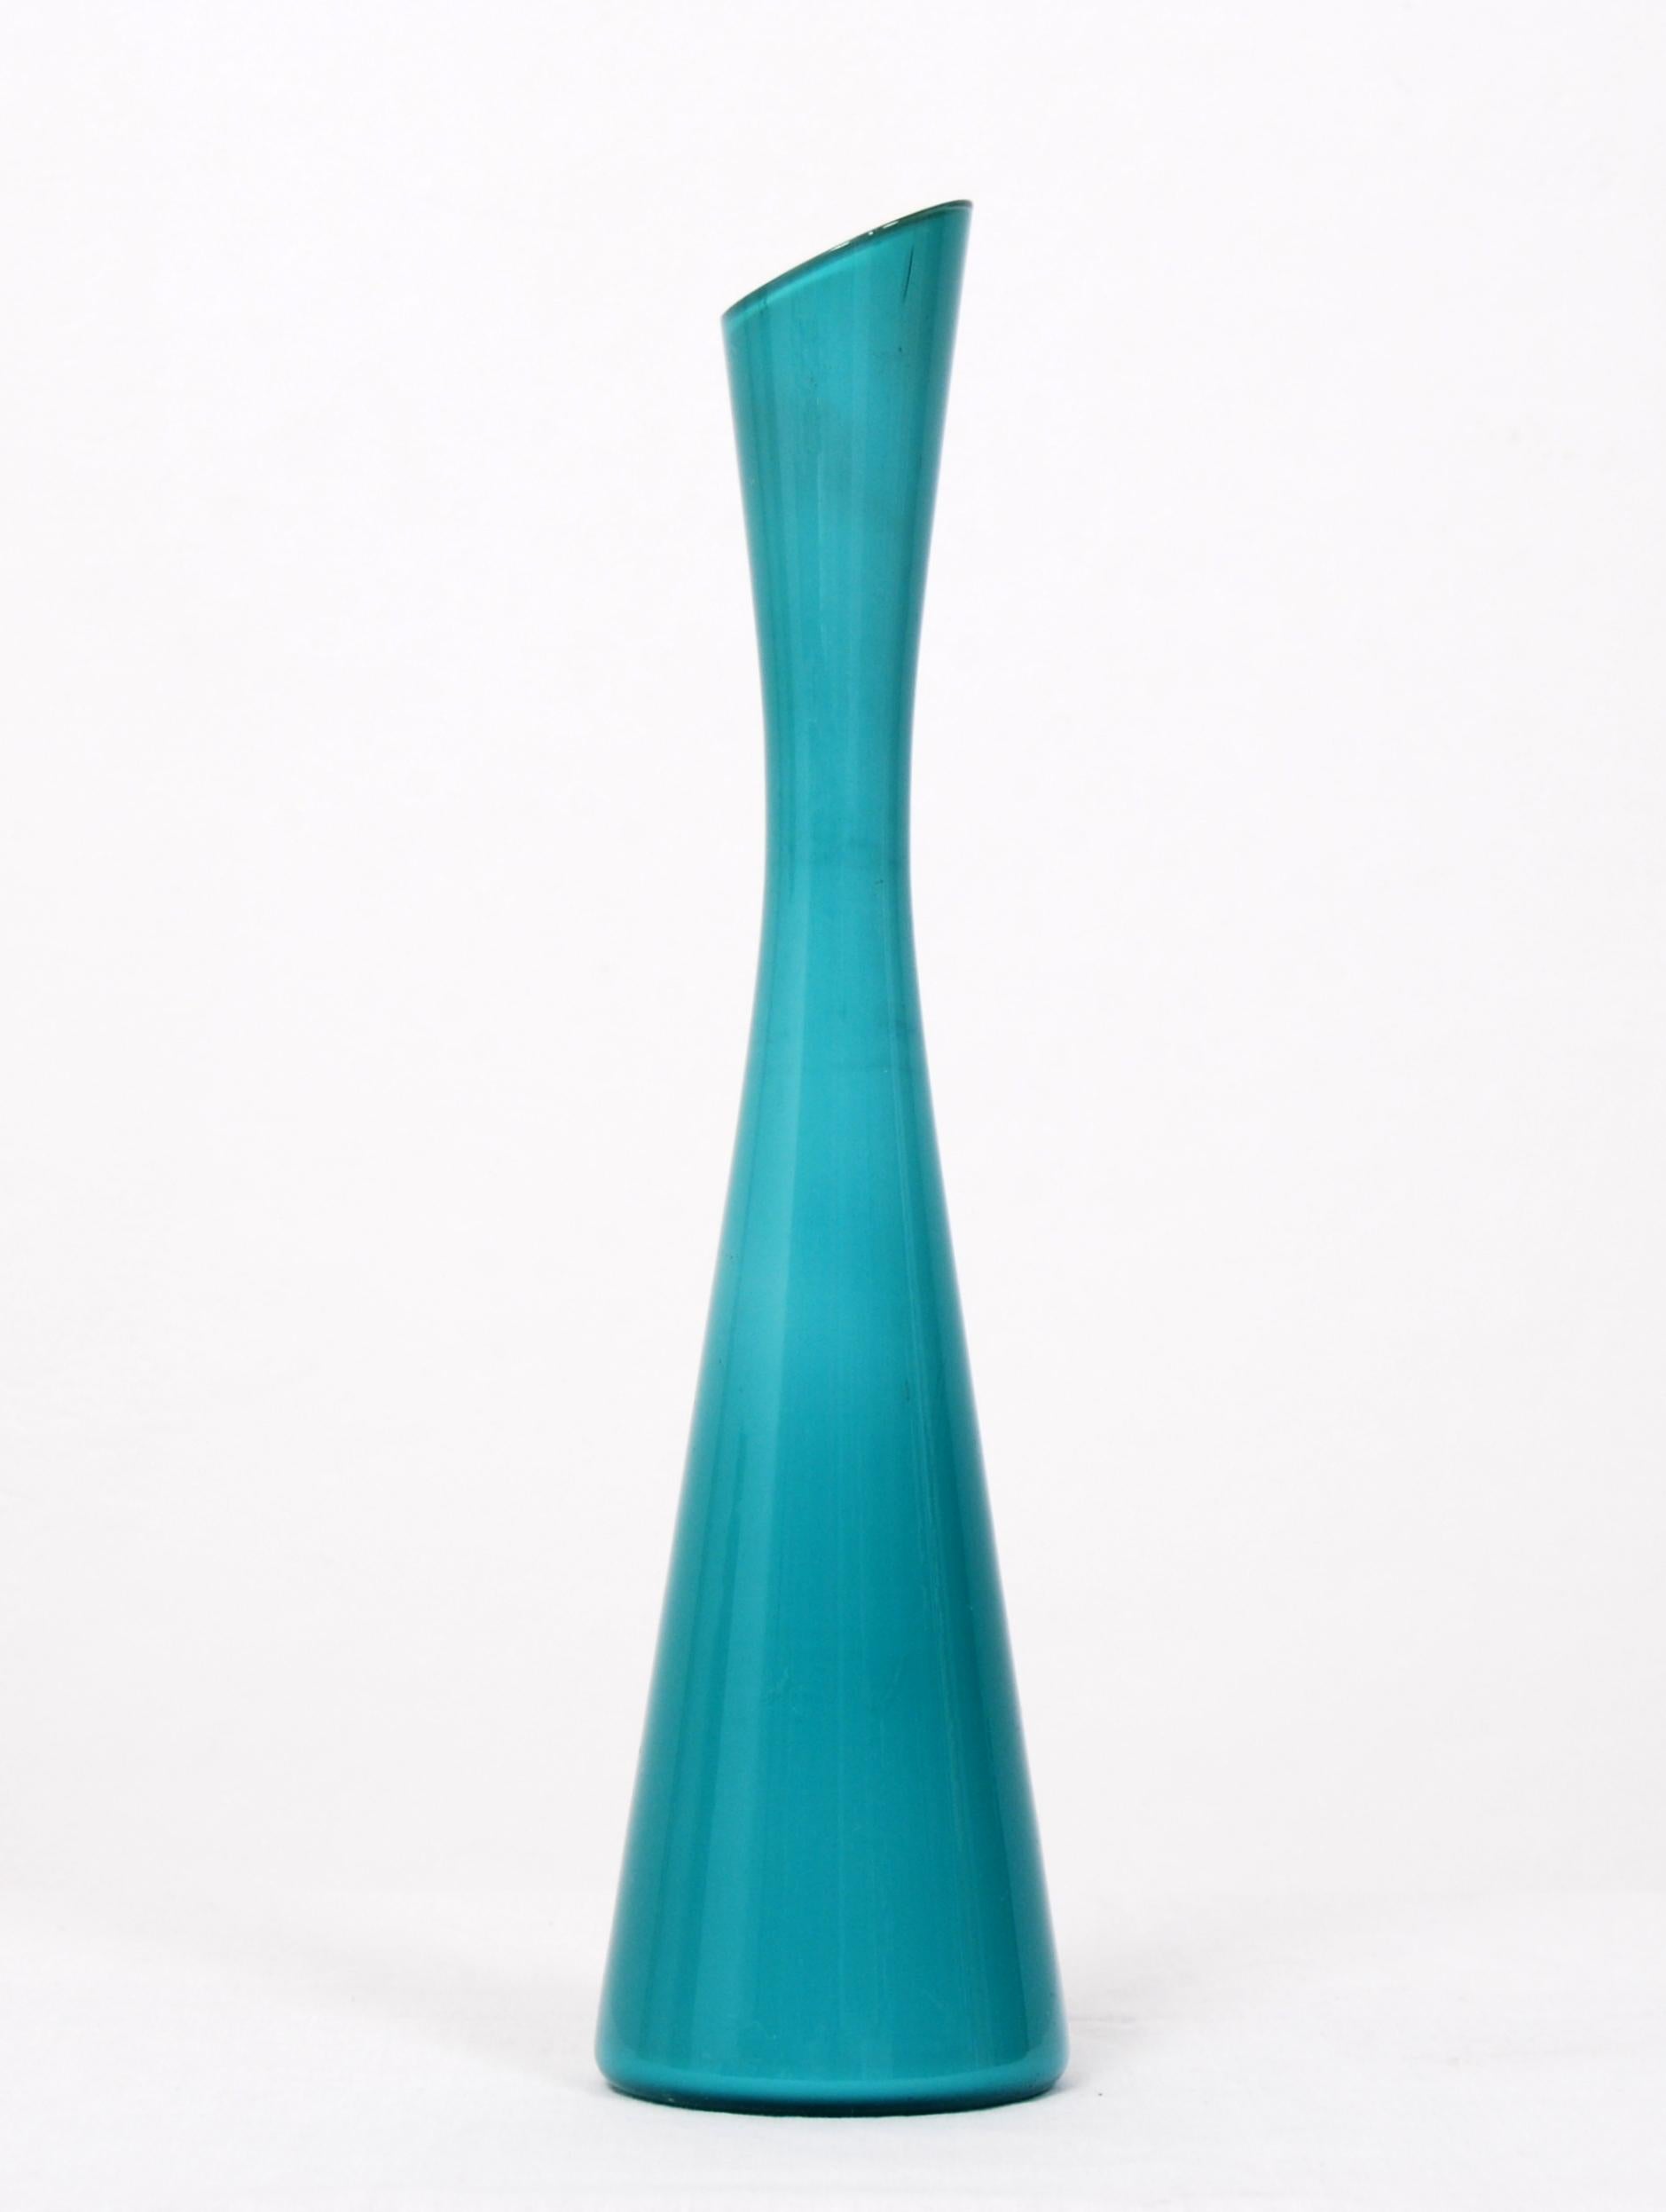 Turquoise glass vase with an opaline glass inside designed by Gunnar Ander in the 1960s for Elme Glasbruk in Sweden. 
 